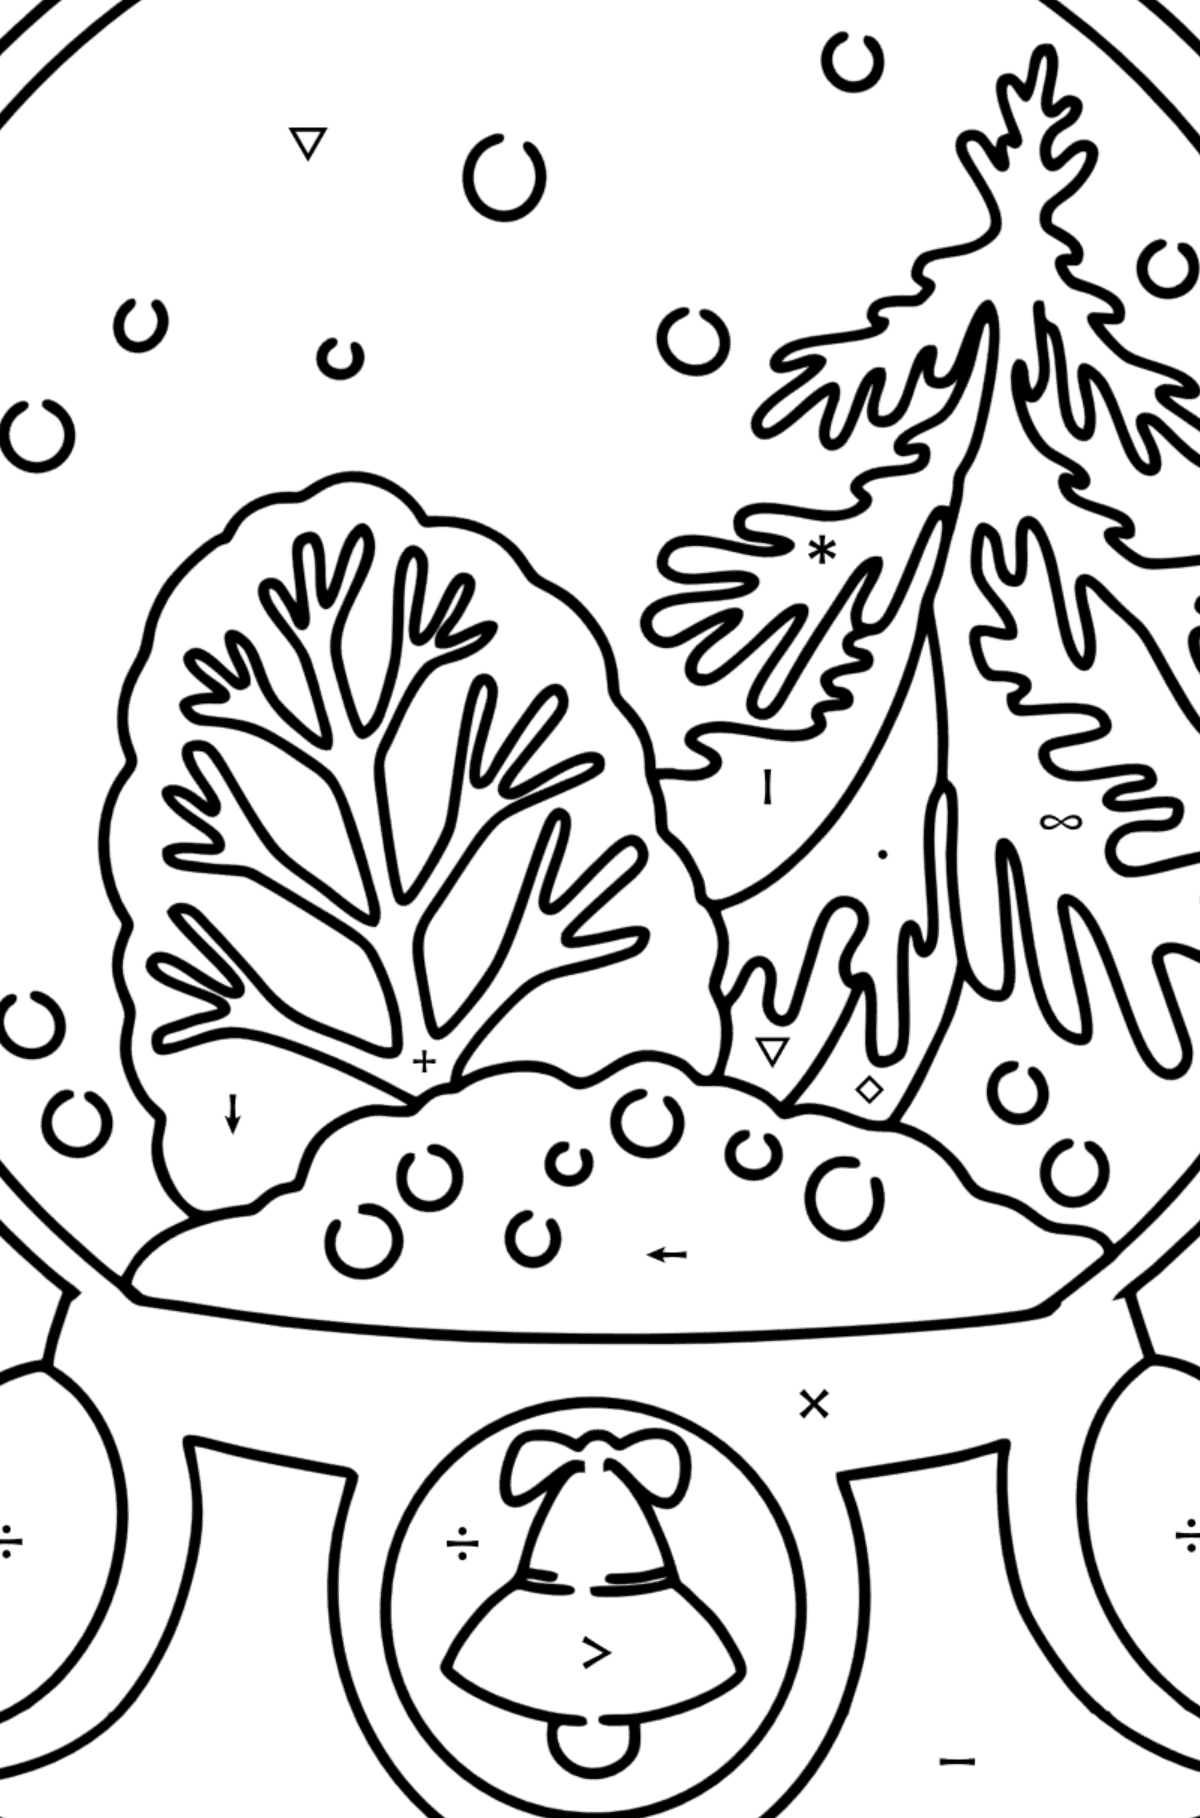 Snow Globe coloring page - Coloring by Symbols for Kids